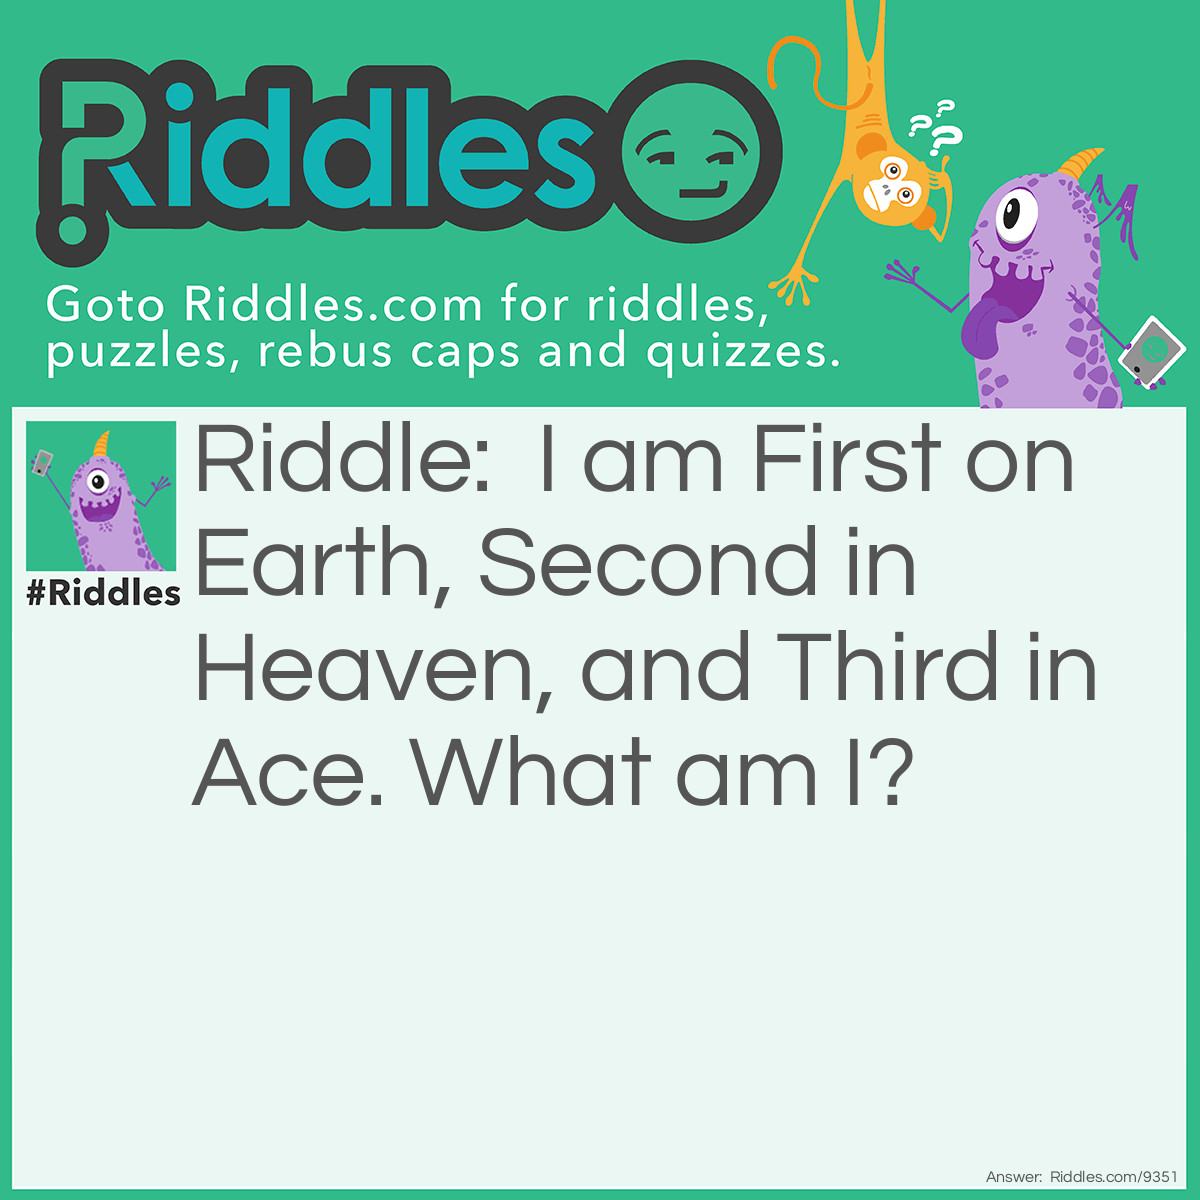 Riddle: I am First on Earth, Second in Heaven, and Third in Ace. What am I? Answer: The letter E.